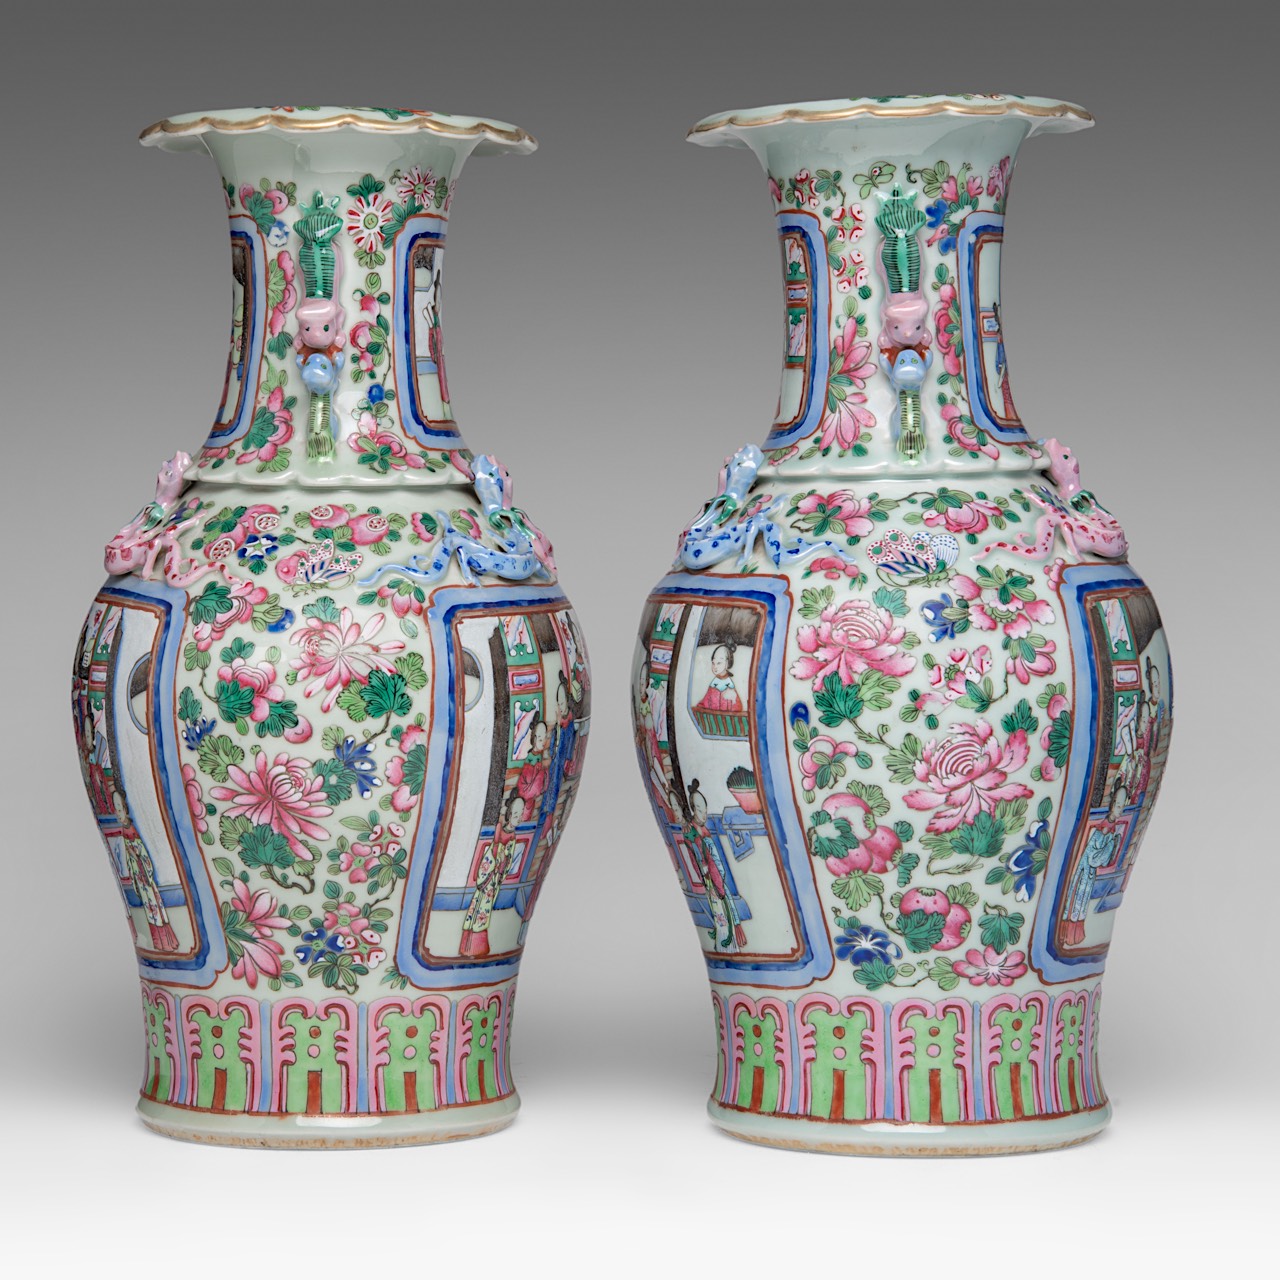 A fine pair of Chinese famille rose 'Beauties in a Chamber' vases, 19thC, H 44 cm - Image 4 of 6